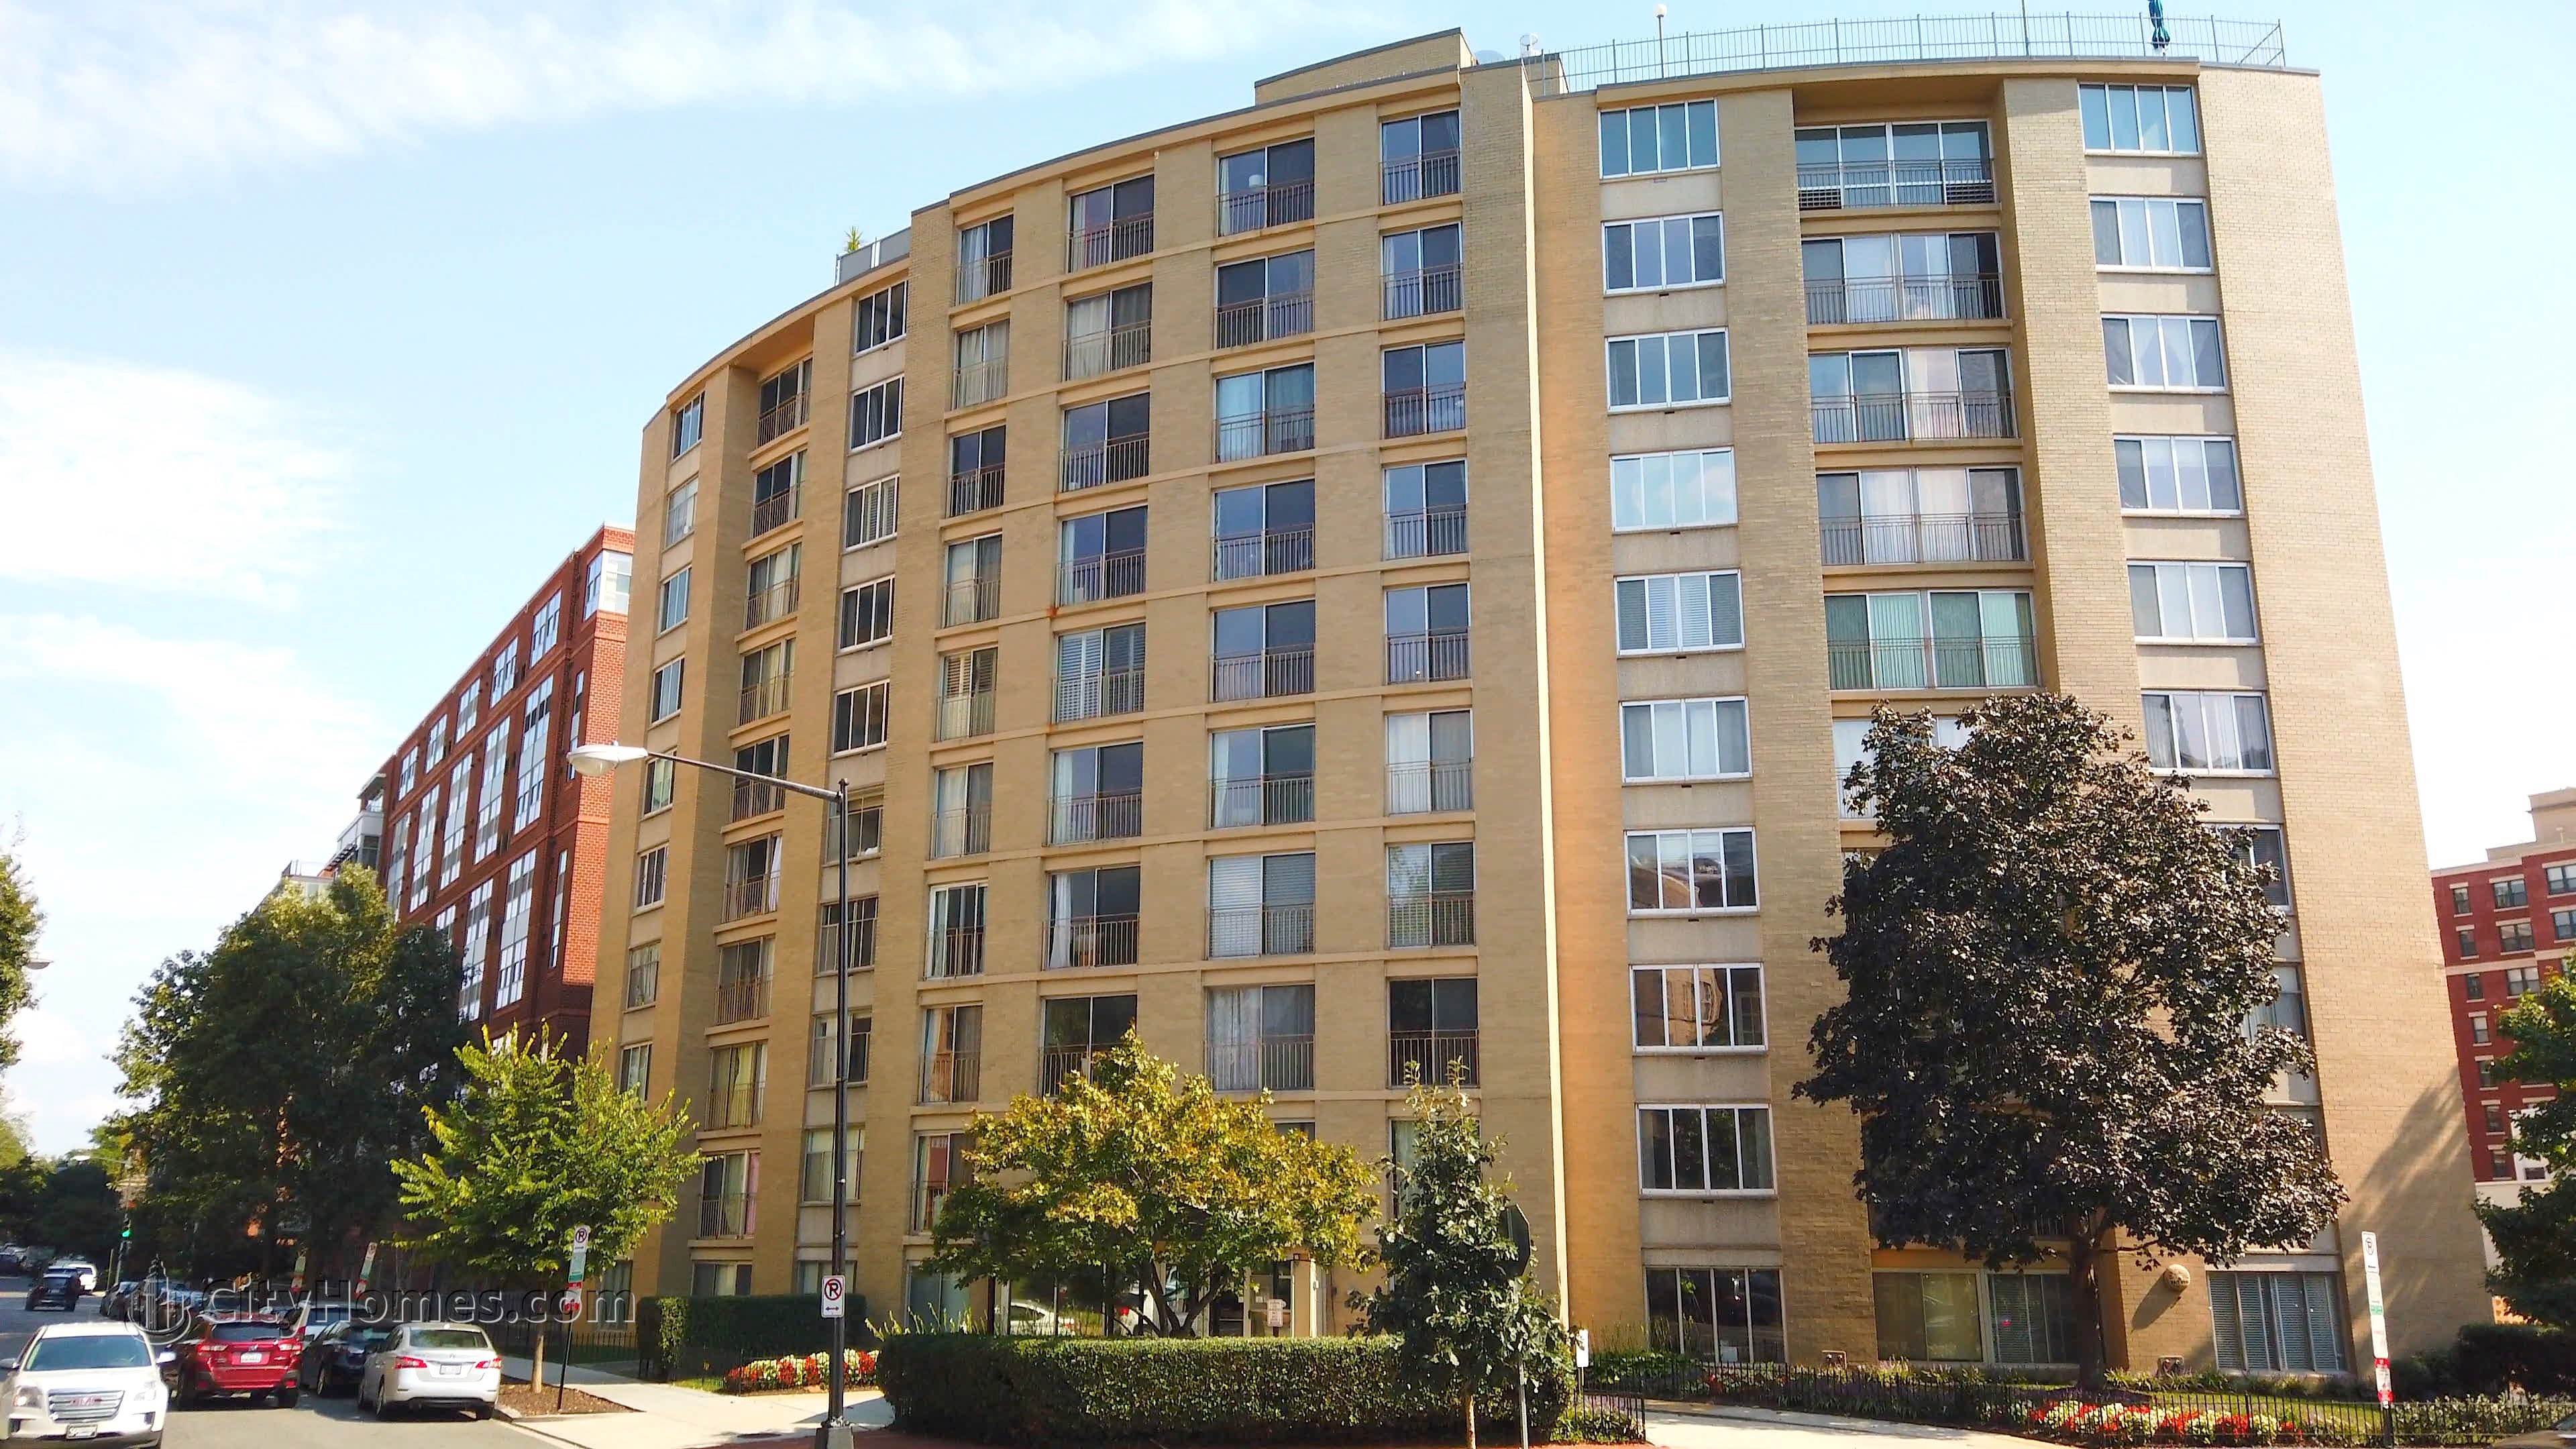 3. Crescent Tower xây dựng tại 1239 Vermont Ave NW, Logan Circle, Washington, DC 20005